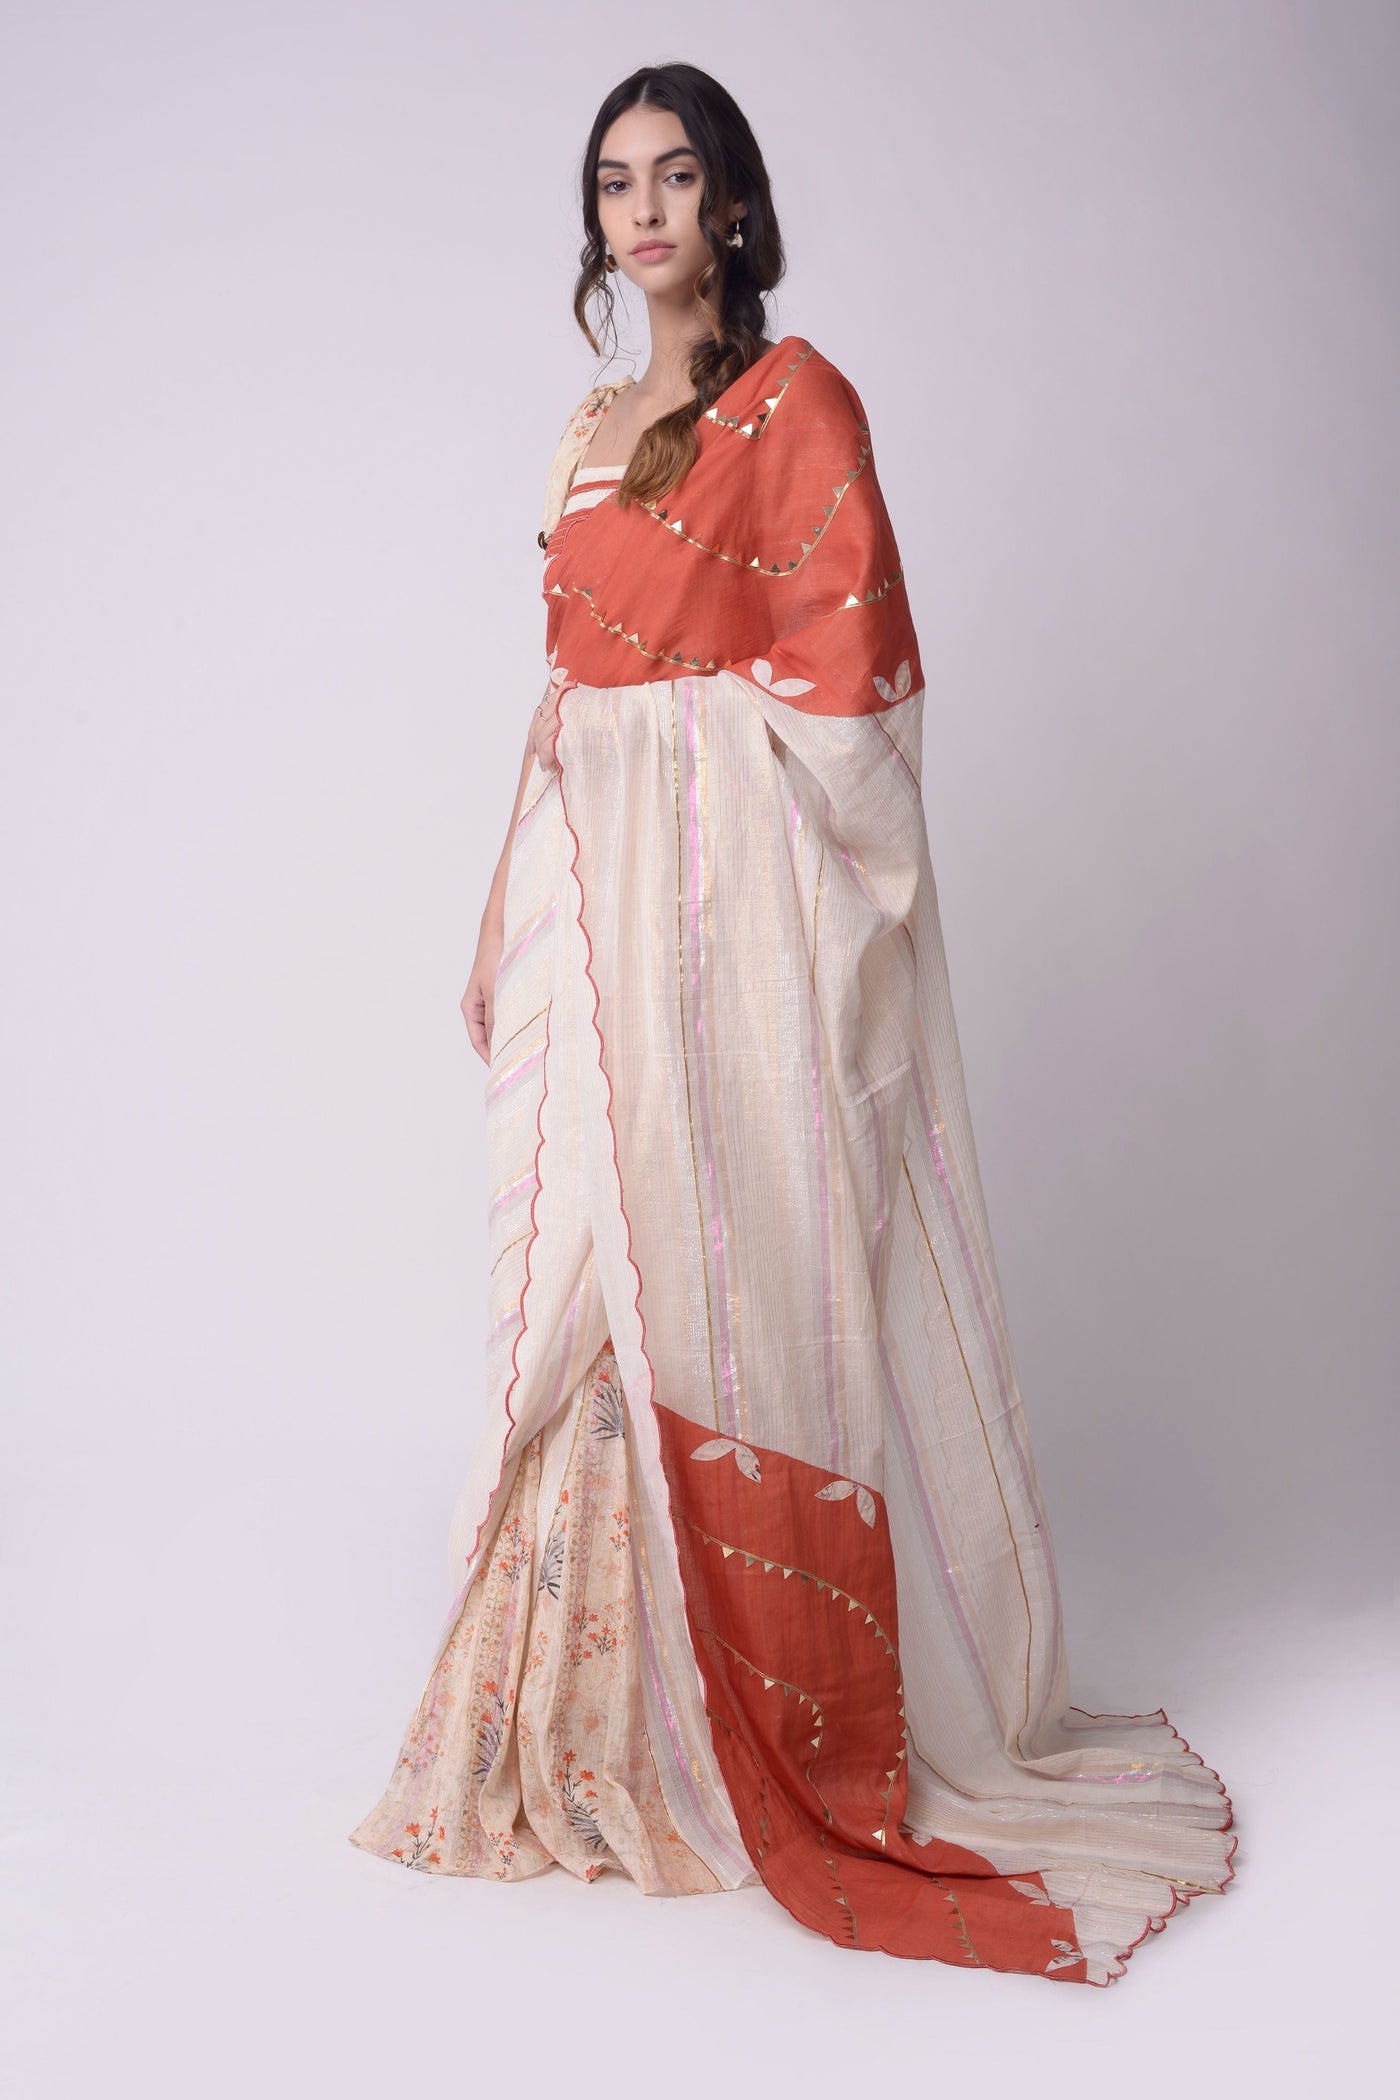 Shwetanga - Indian Clothing in Denver, CO, Aurora, CO, Boulder, CO, Fort Collins, CO, Colorado Springs, CO, Parker, CO, Highlands Ranch, CO, Cherry Creek, CO, Centennial, CO, and Longmont, CO. Nationwide shipping USA - India Fashion X